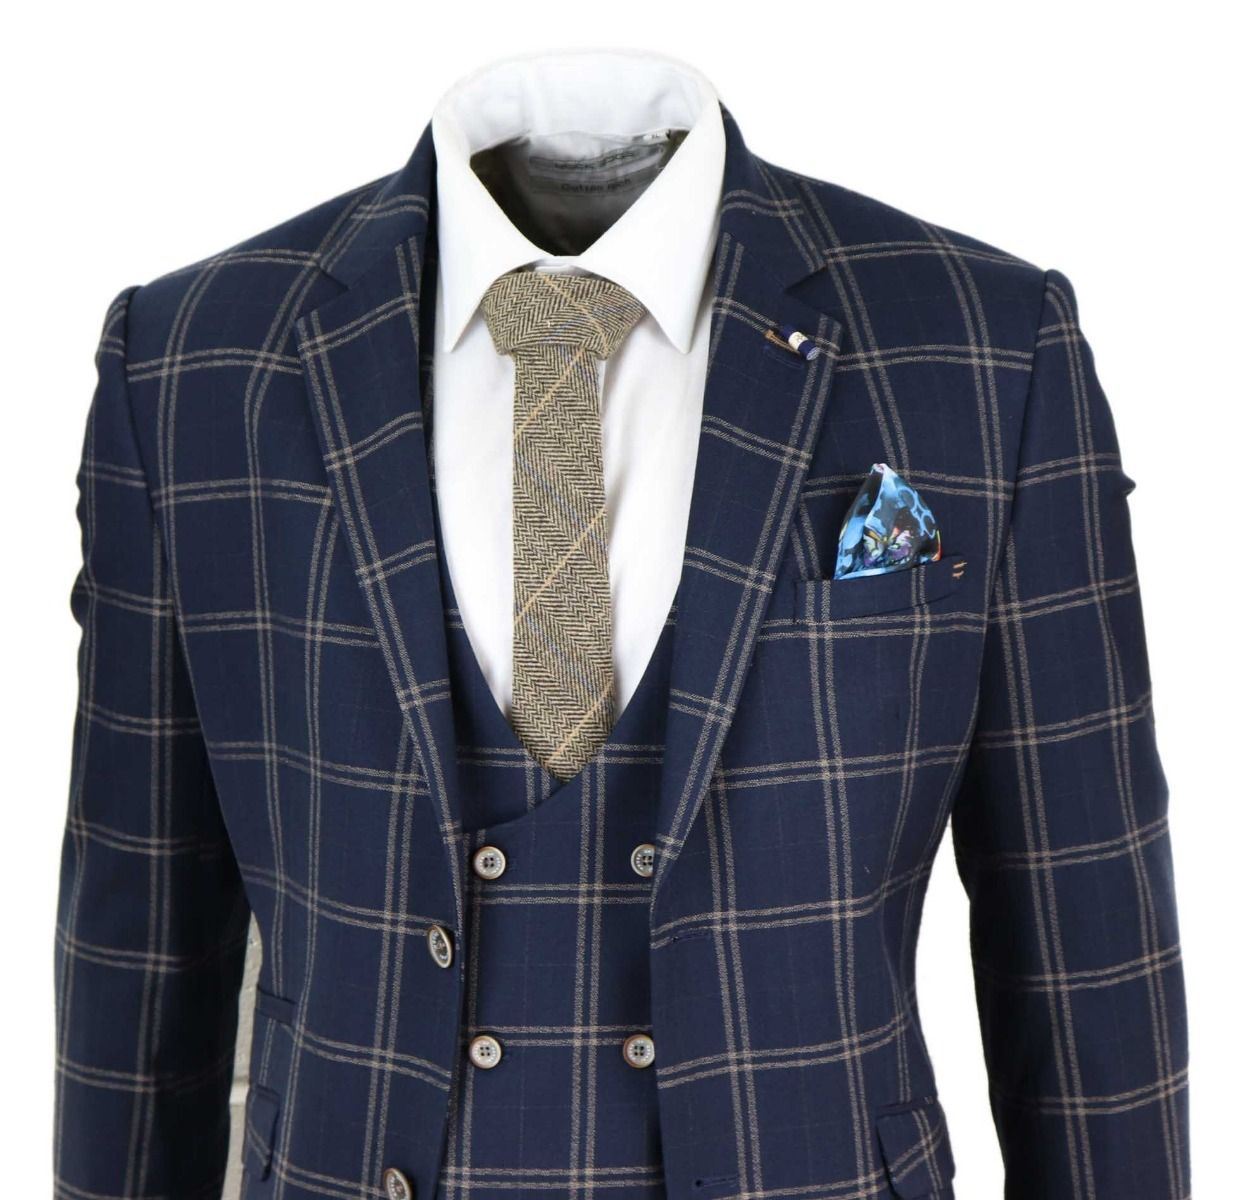 Mens 3 Piece Navy Blue And Tan Check Tweed Retro Classic Suit